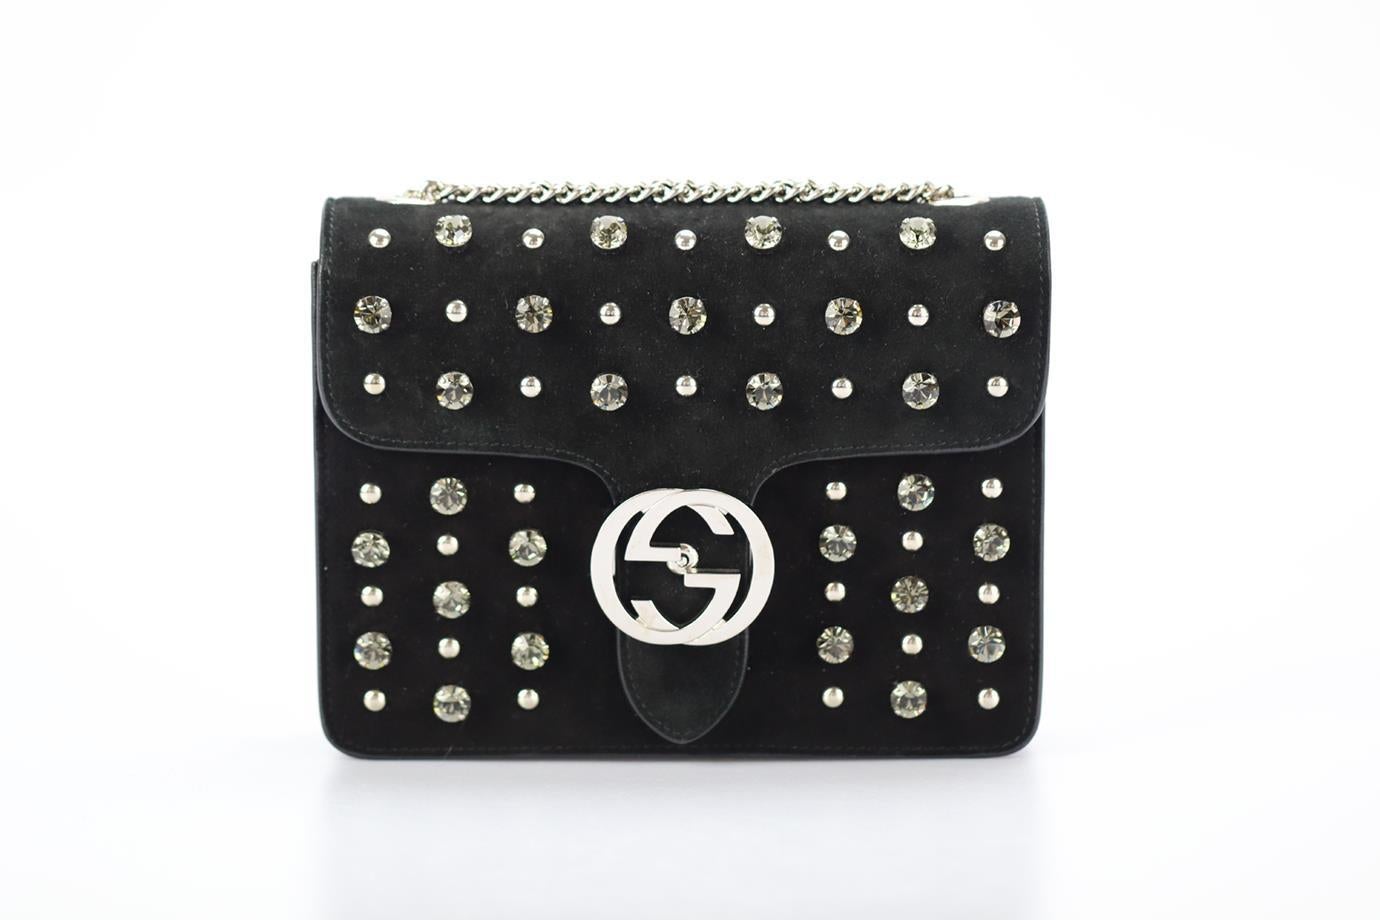 Gucci Dollar Gg Crystal Embellished Suede Shoulder Bag. Black. Clasp fastening - Front. Does not come with - dustbag or box. Height: 6 in. Width: 12.2 in. Depth: 2.8 in. Handle drop: 19 in. Condition: Used. Very good condition - Some scratching to